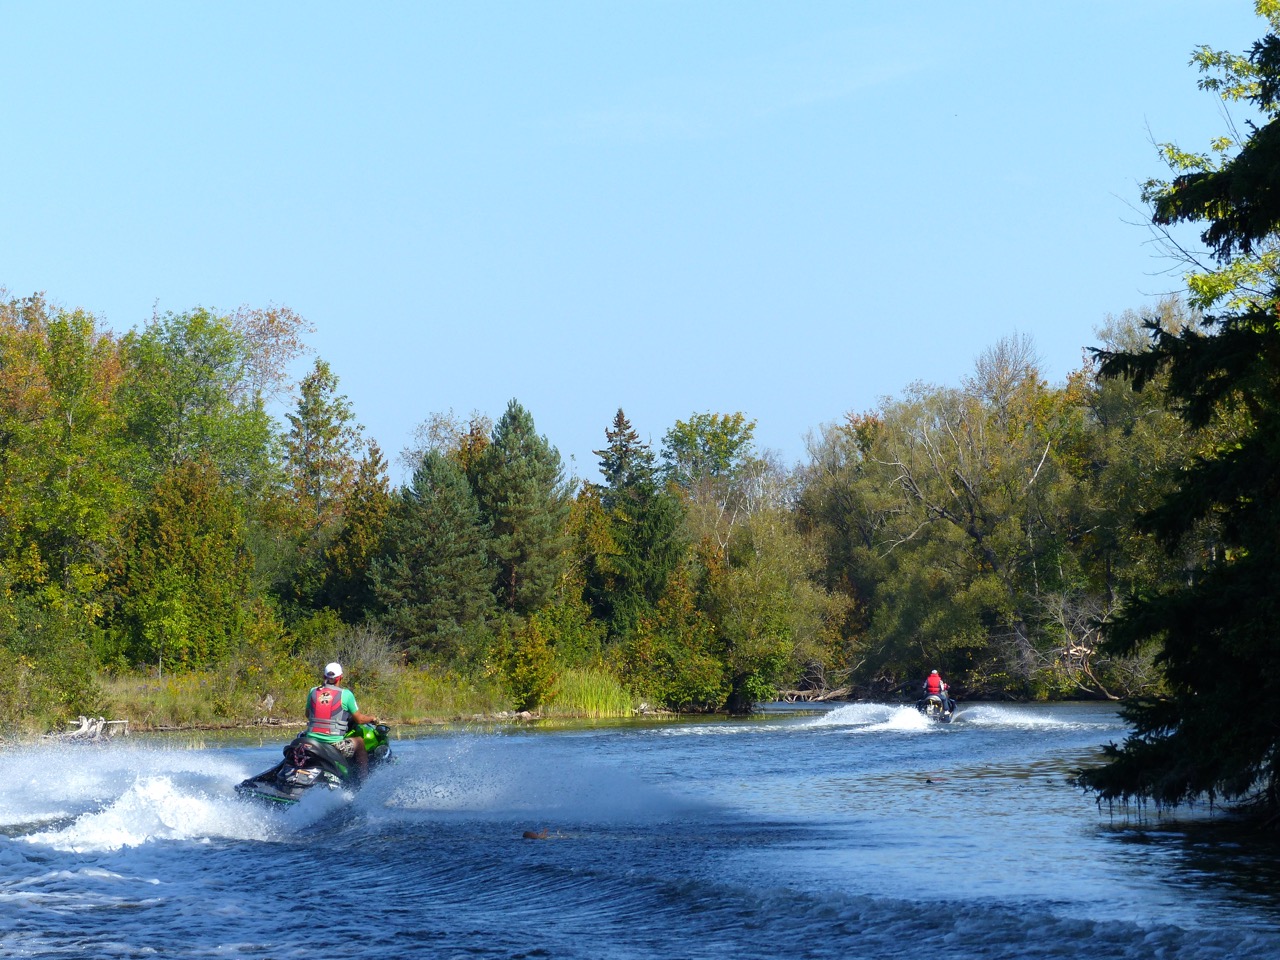 Shoreline speed restrictions are part of Ontario PWC boating regs